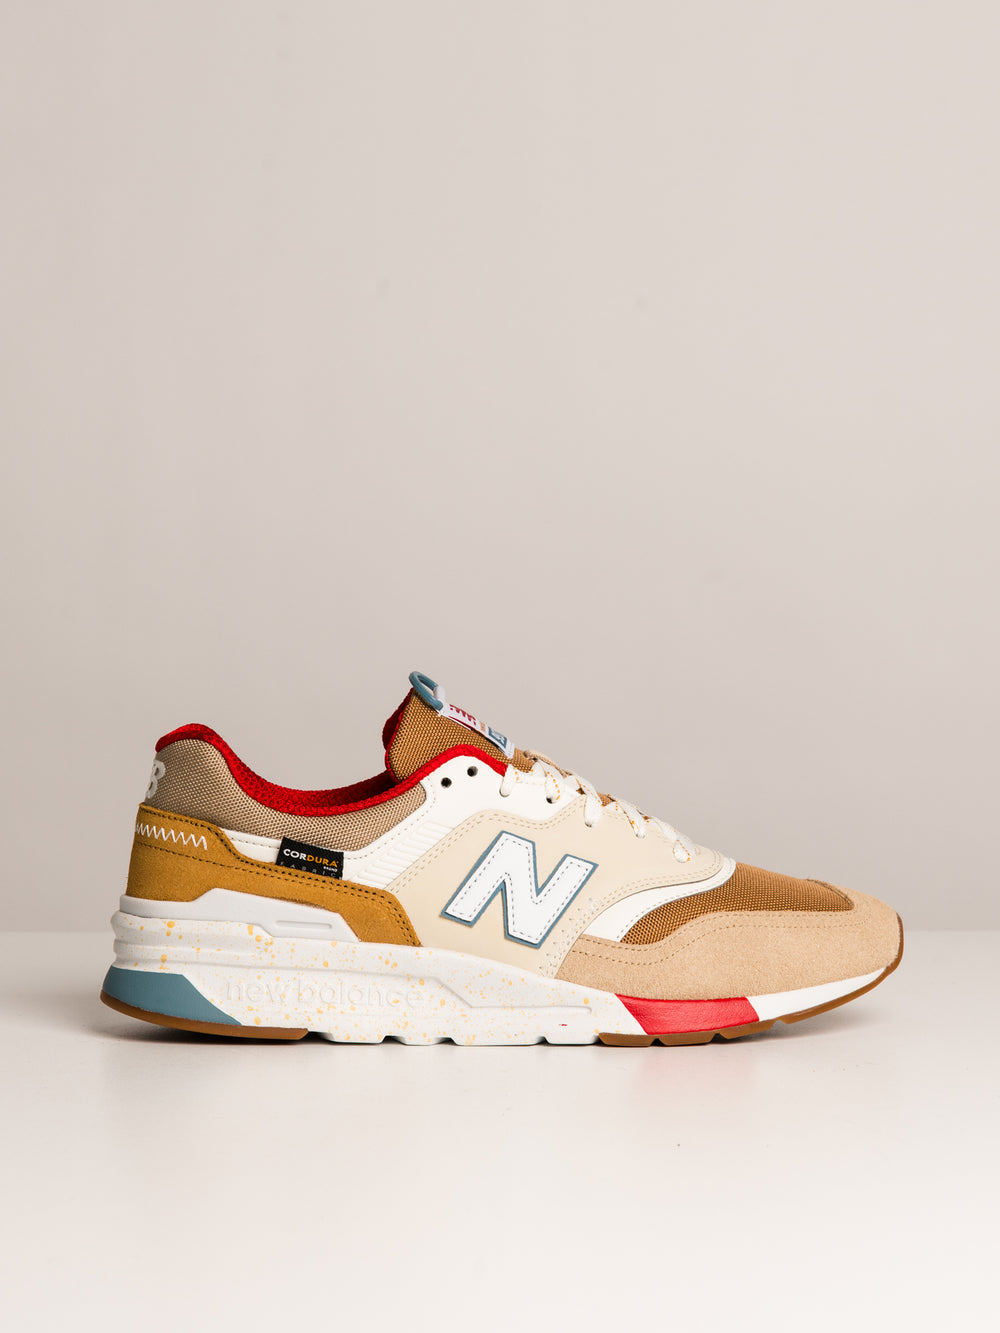 MENS NEW BALANCE THE 997 - CLEARANCE